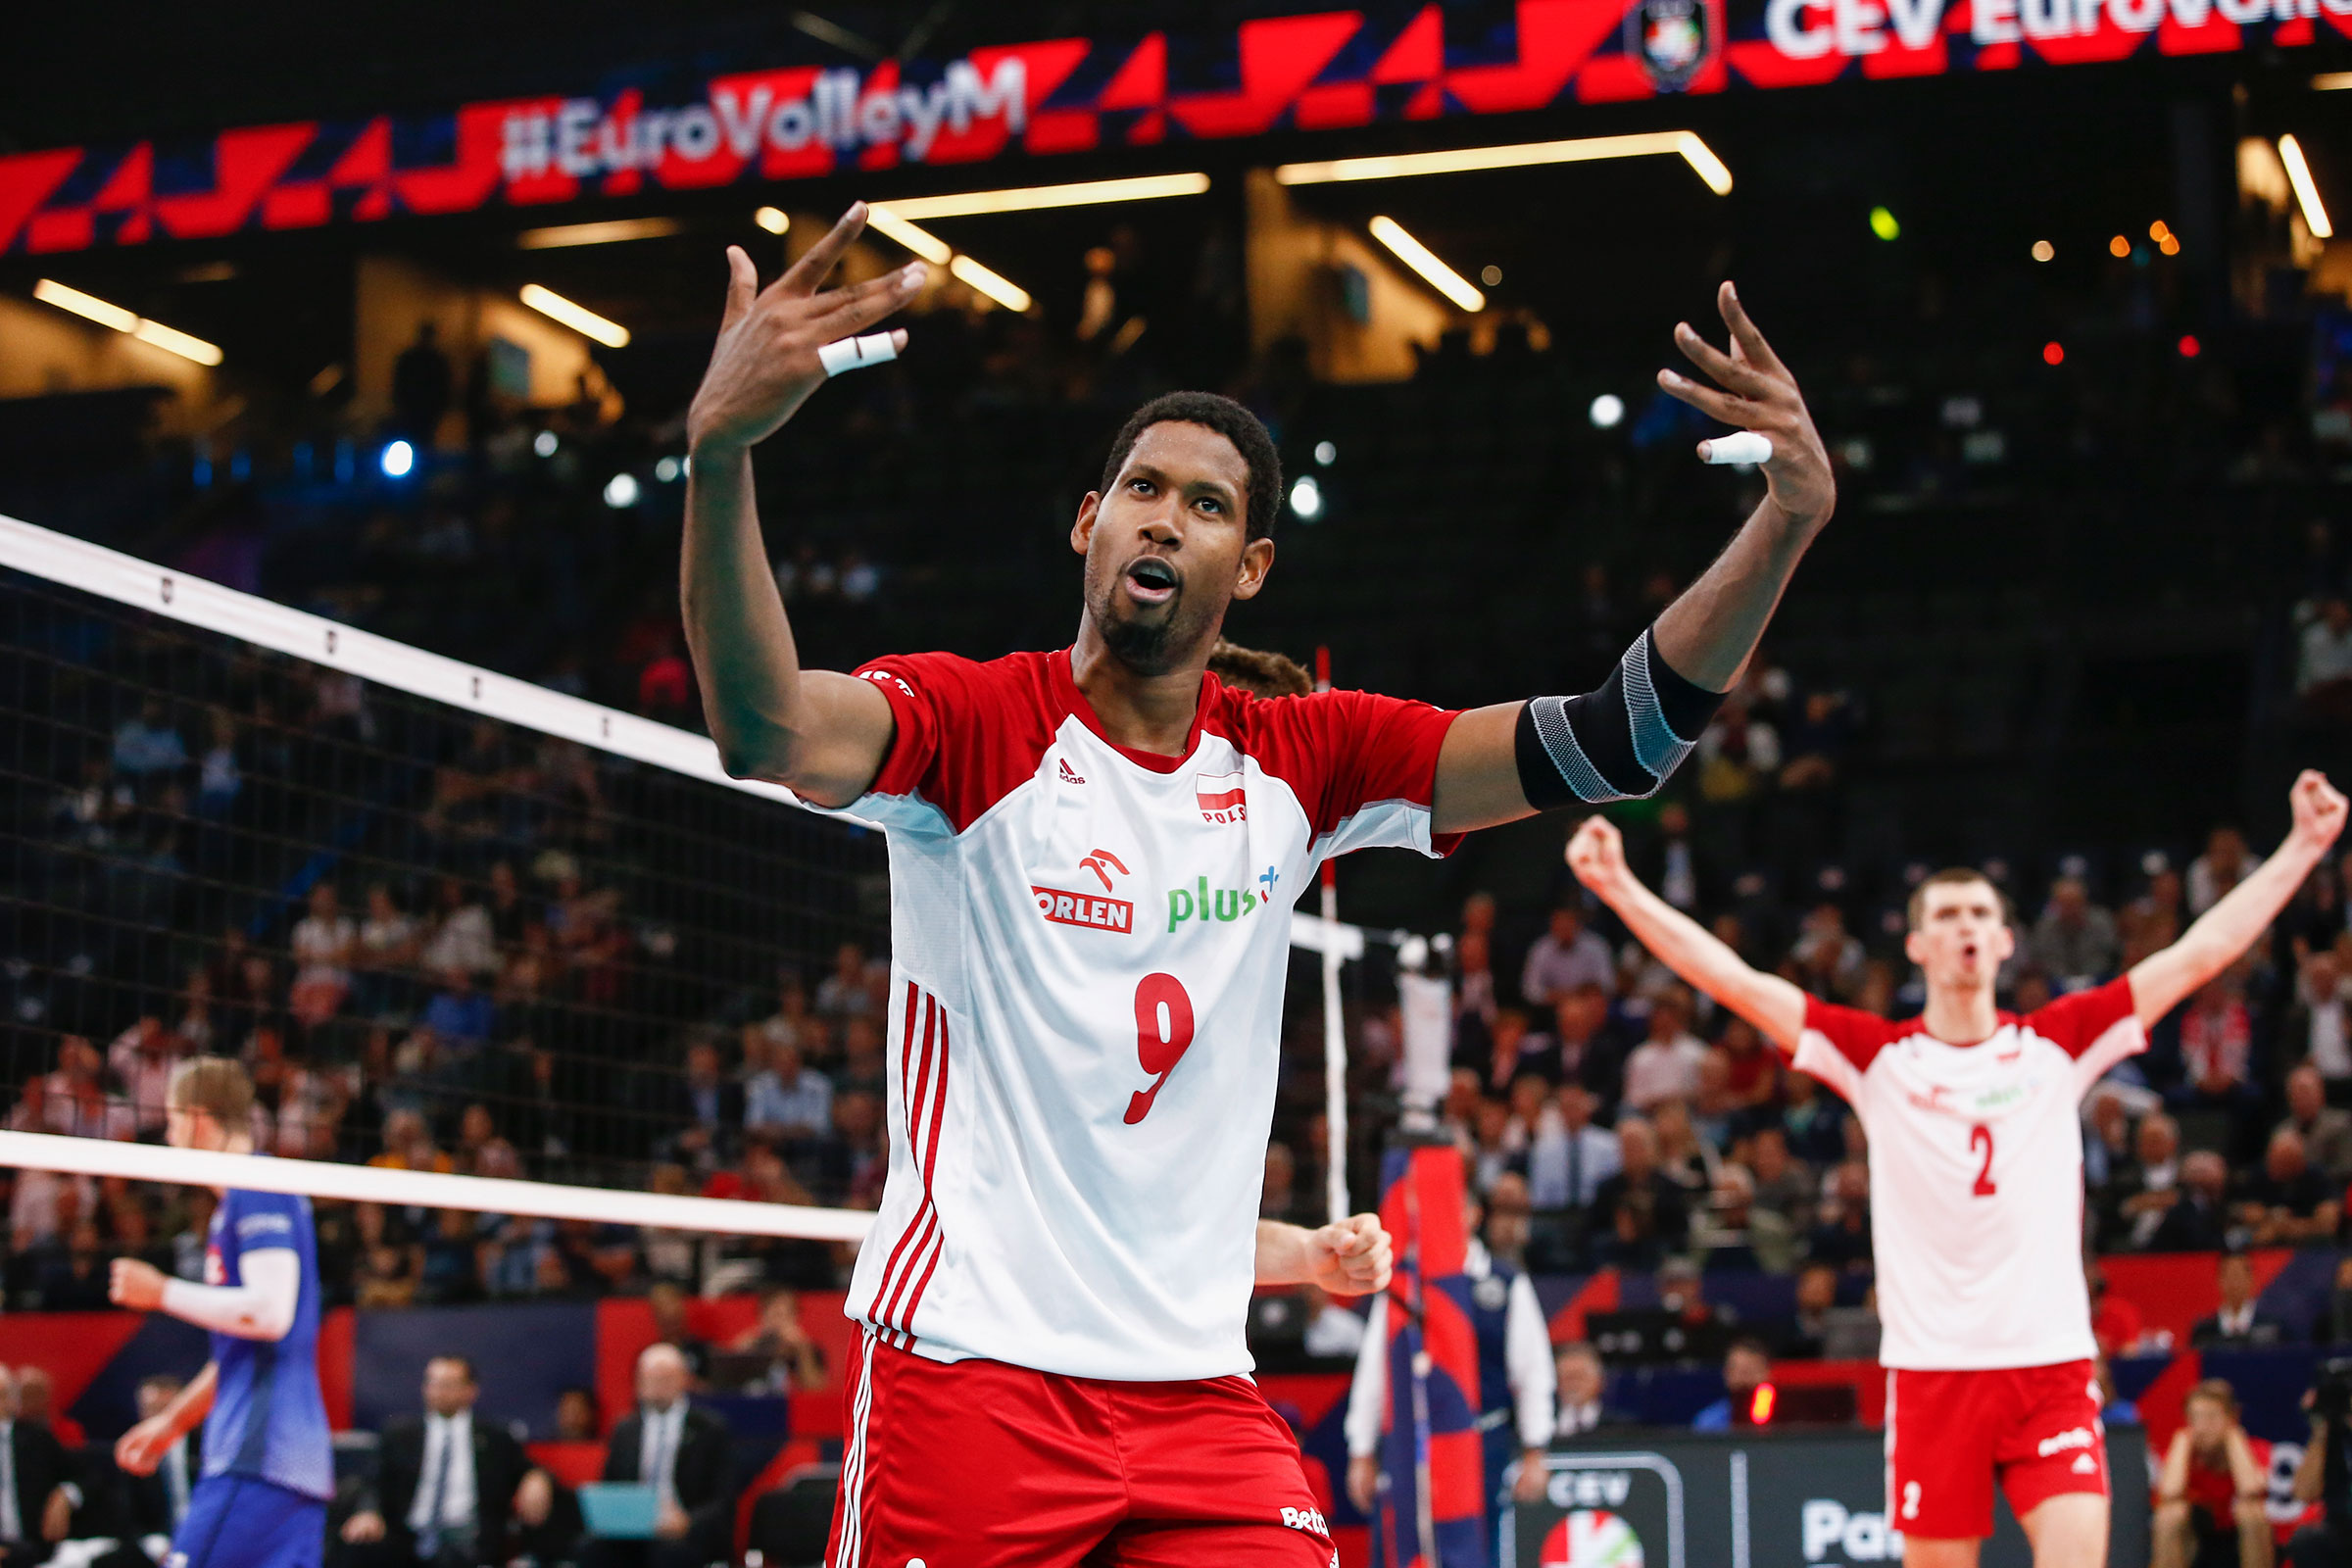 Wilfredo Leon Venero of Poland celebrates a point against France during EuroVolley on September 28, 2019 in Paris, France. (Catherine Steenkeste—Getty Images)